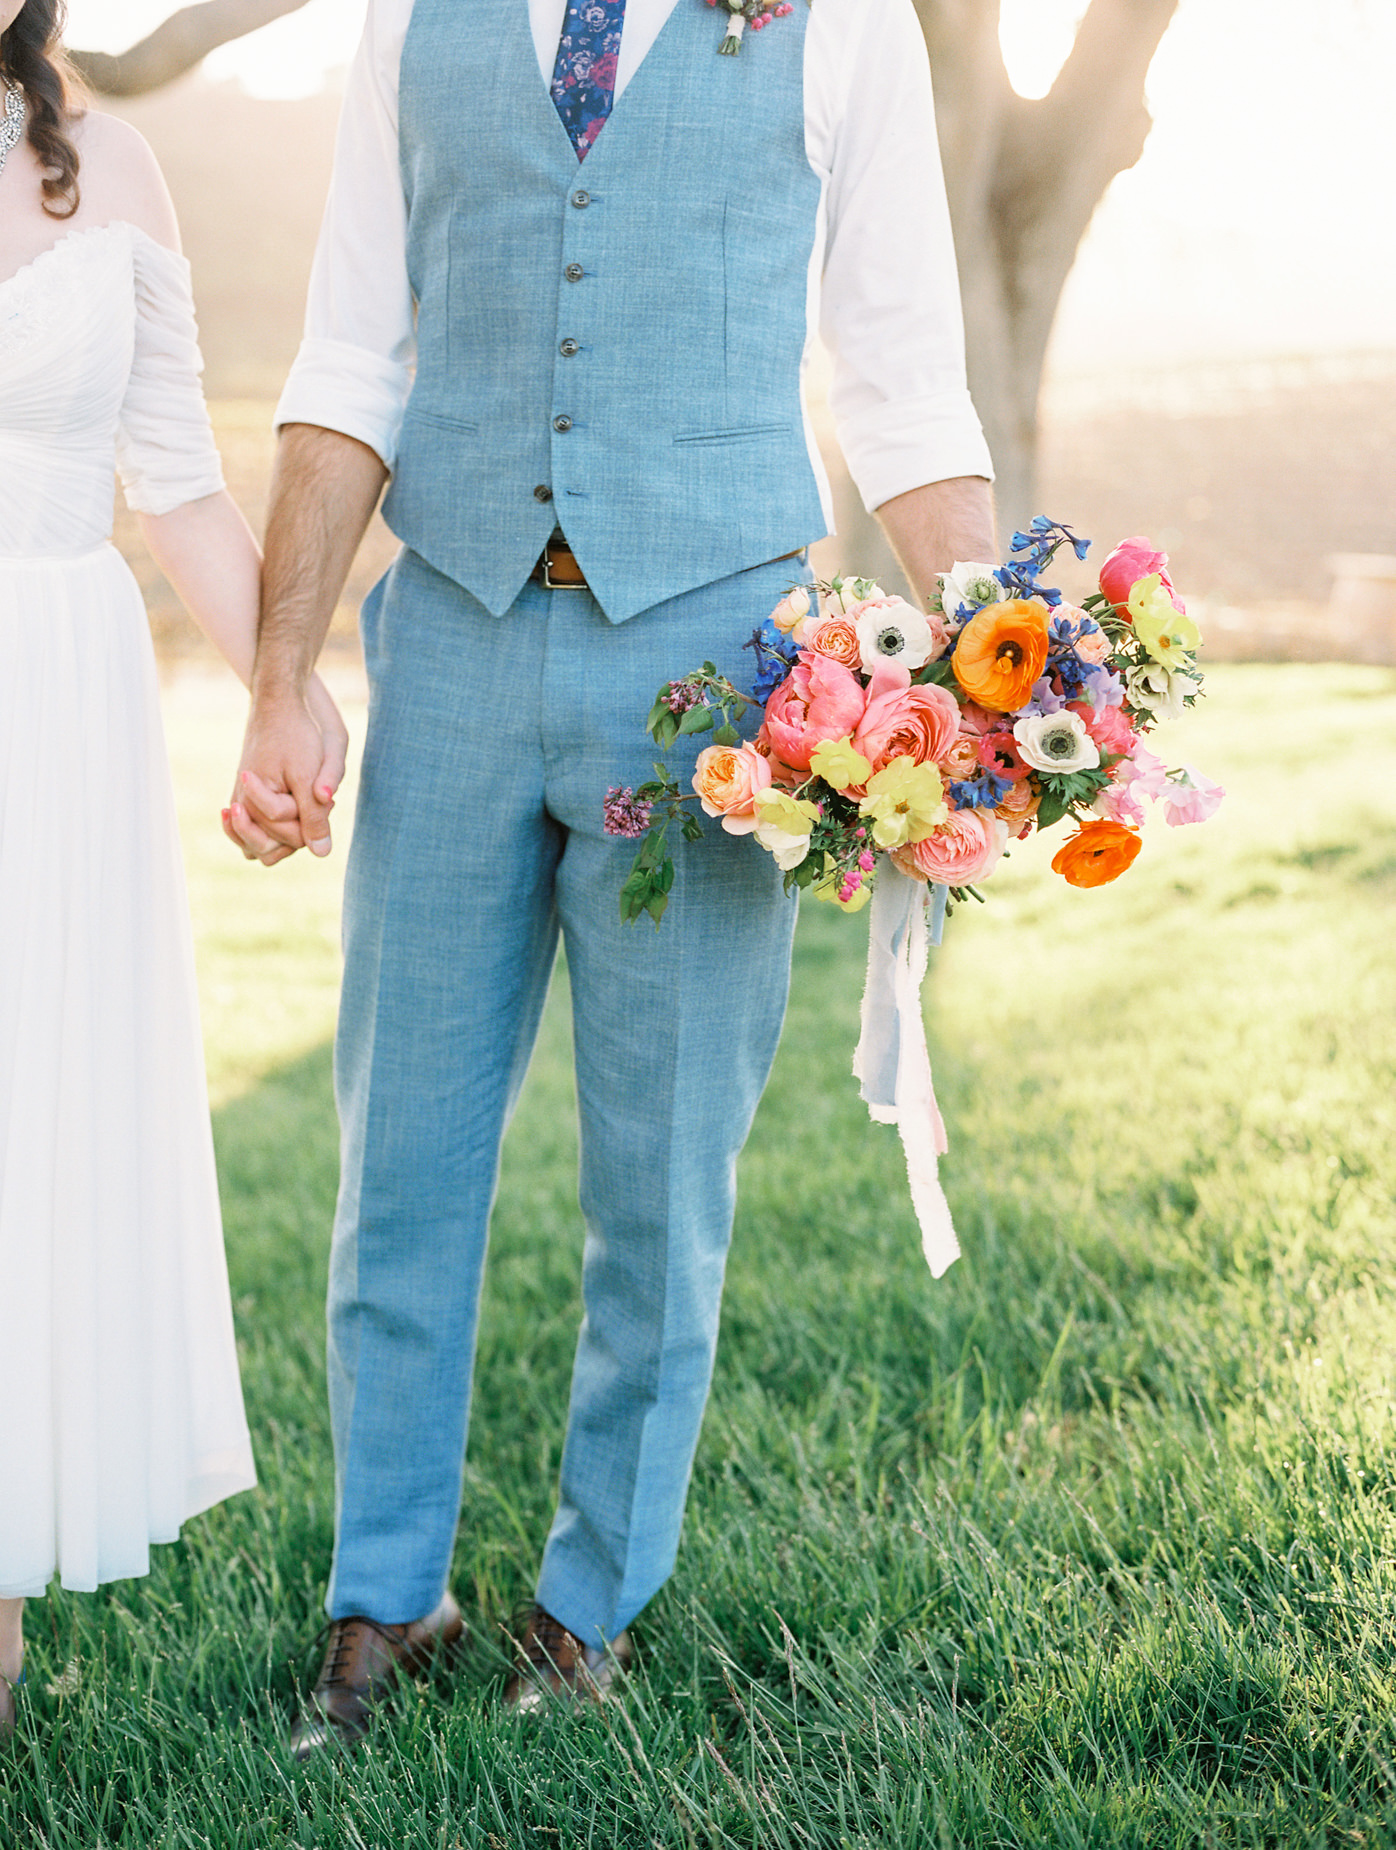 Groom holds bridal bouquet with vibrant colors at Elopement Photography in Wine Country at Hammersky Vineyards